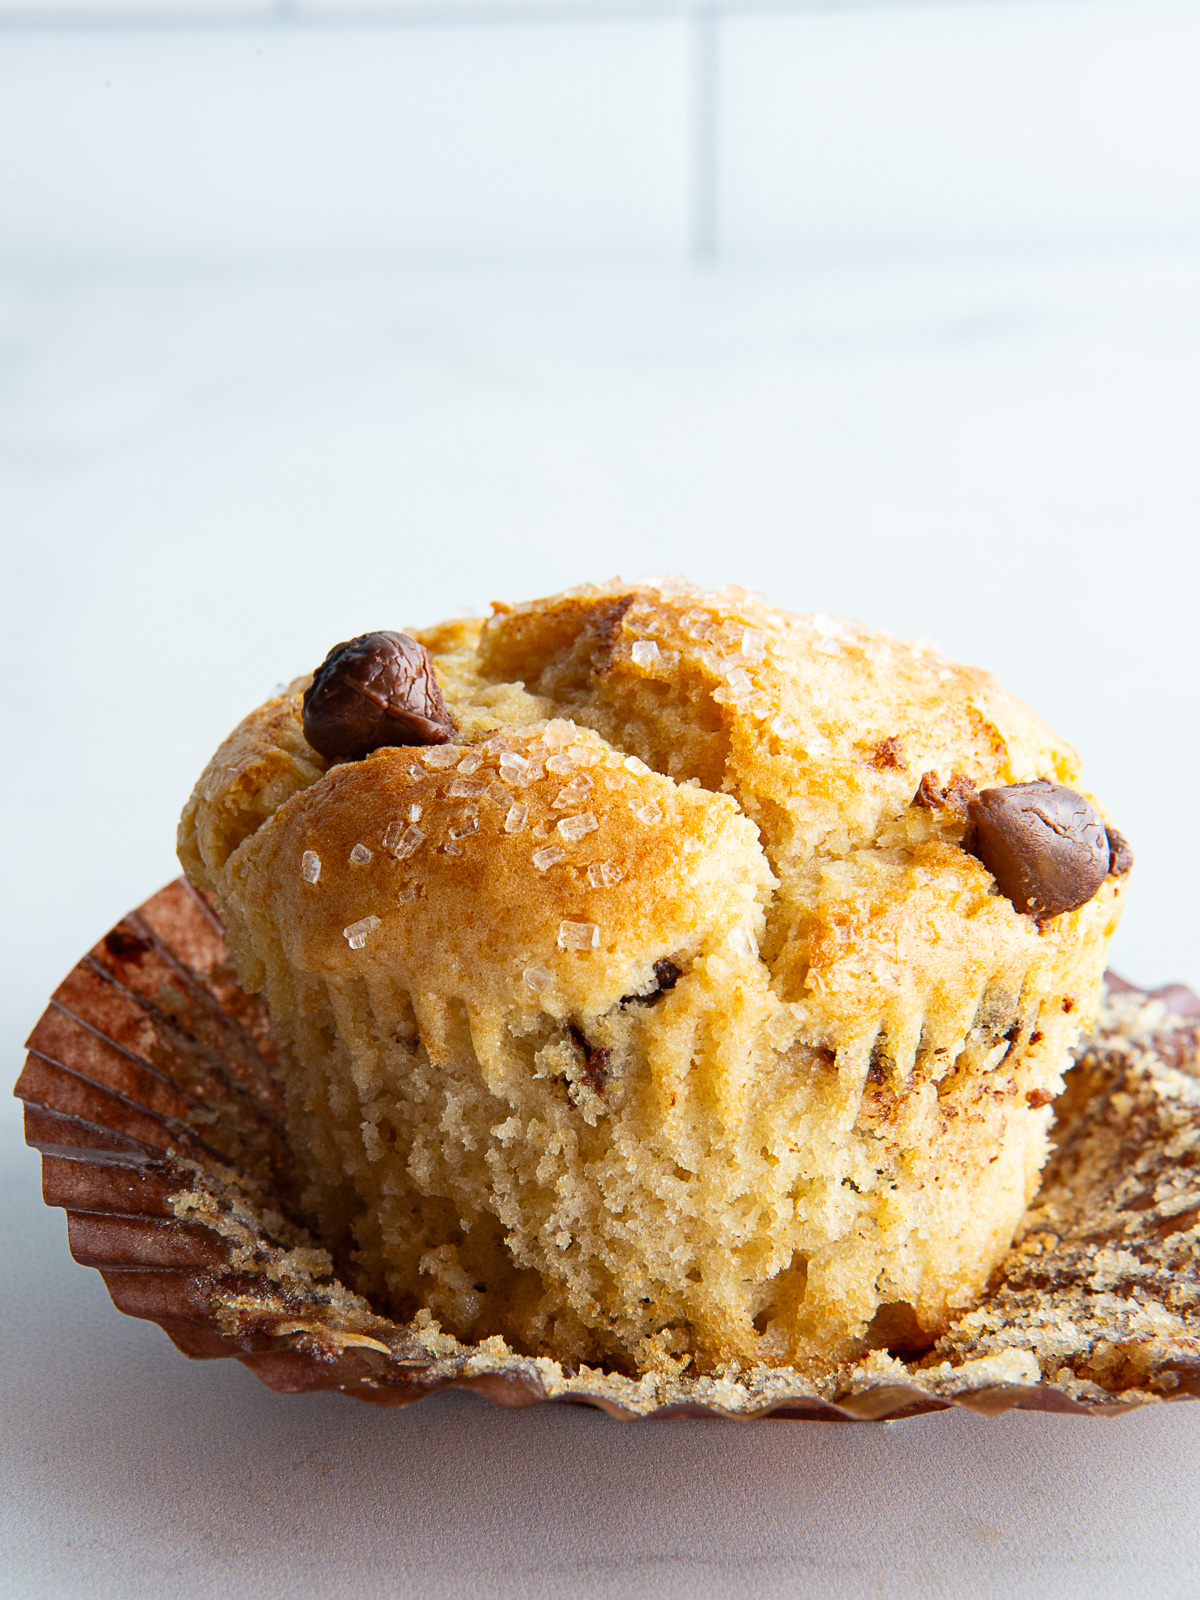 Gluten-free chocolate chip muffin unwrapped on a counter.